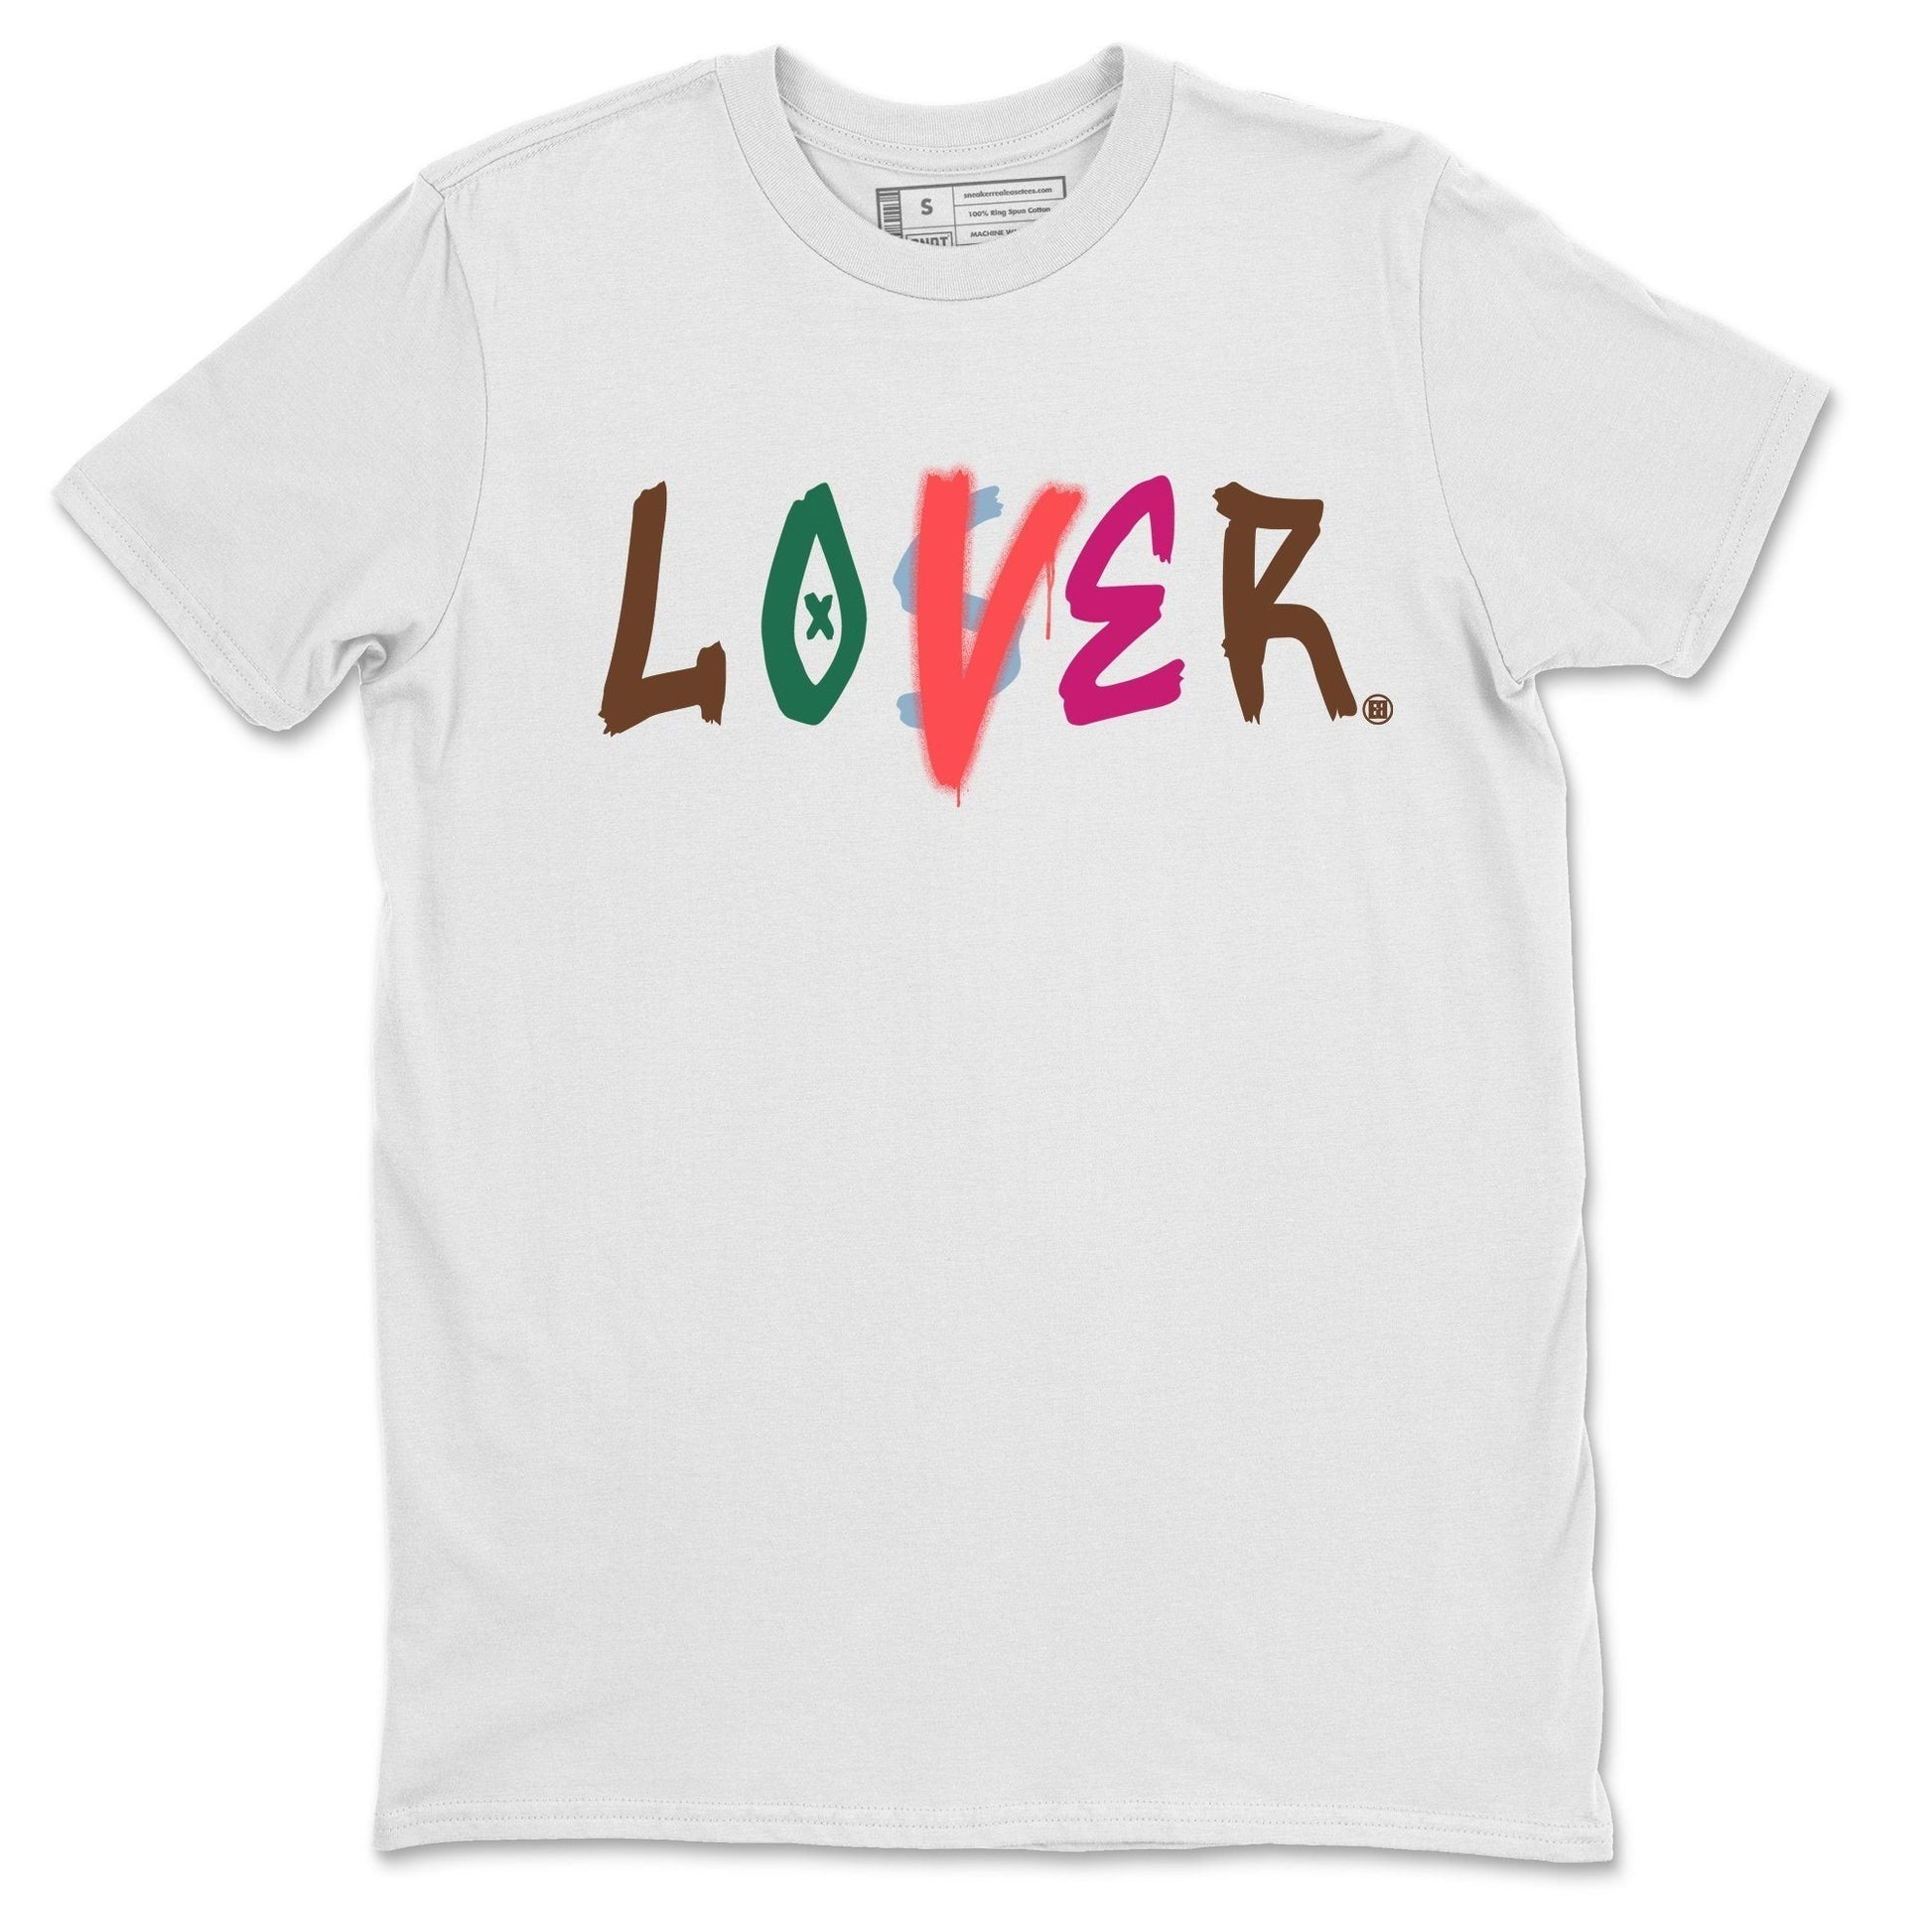 Jordan 1 Hand Crafted Sneaker Match Tees Loser Lover Sneaker Tees Jordan 1 Hand Crafted Sneaker Release Tees Unisex Shirts